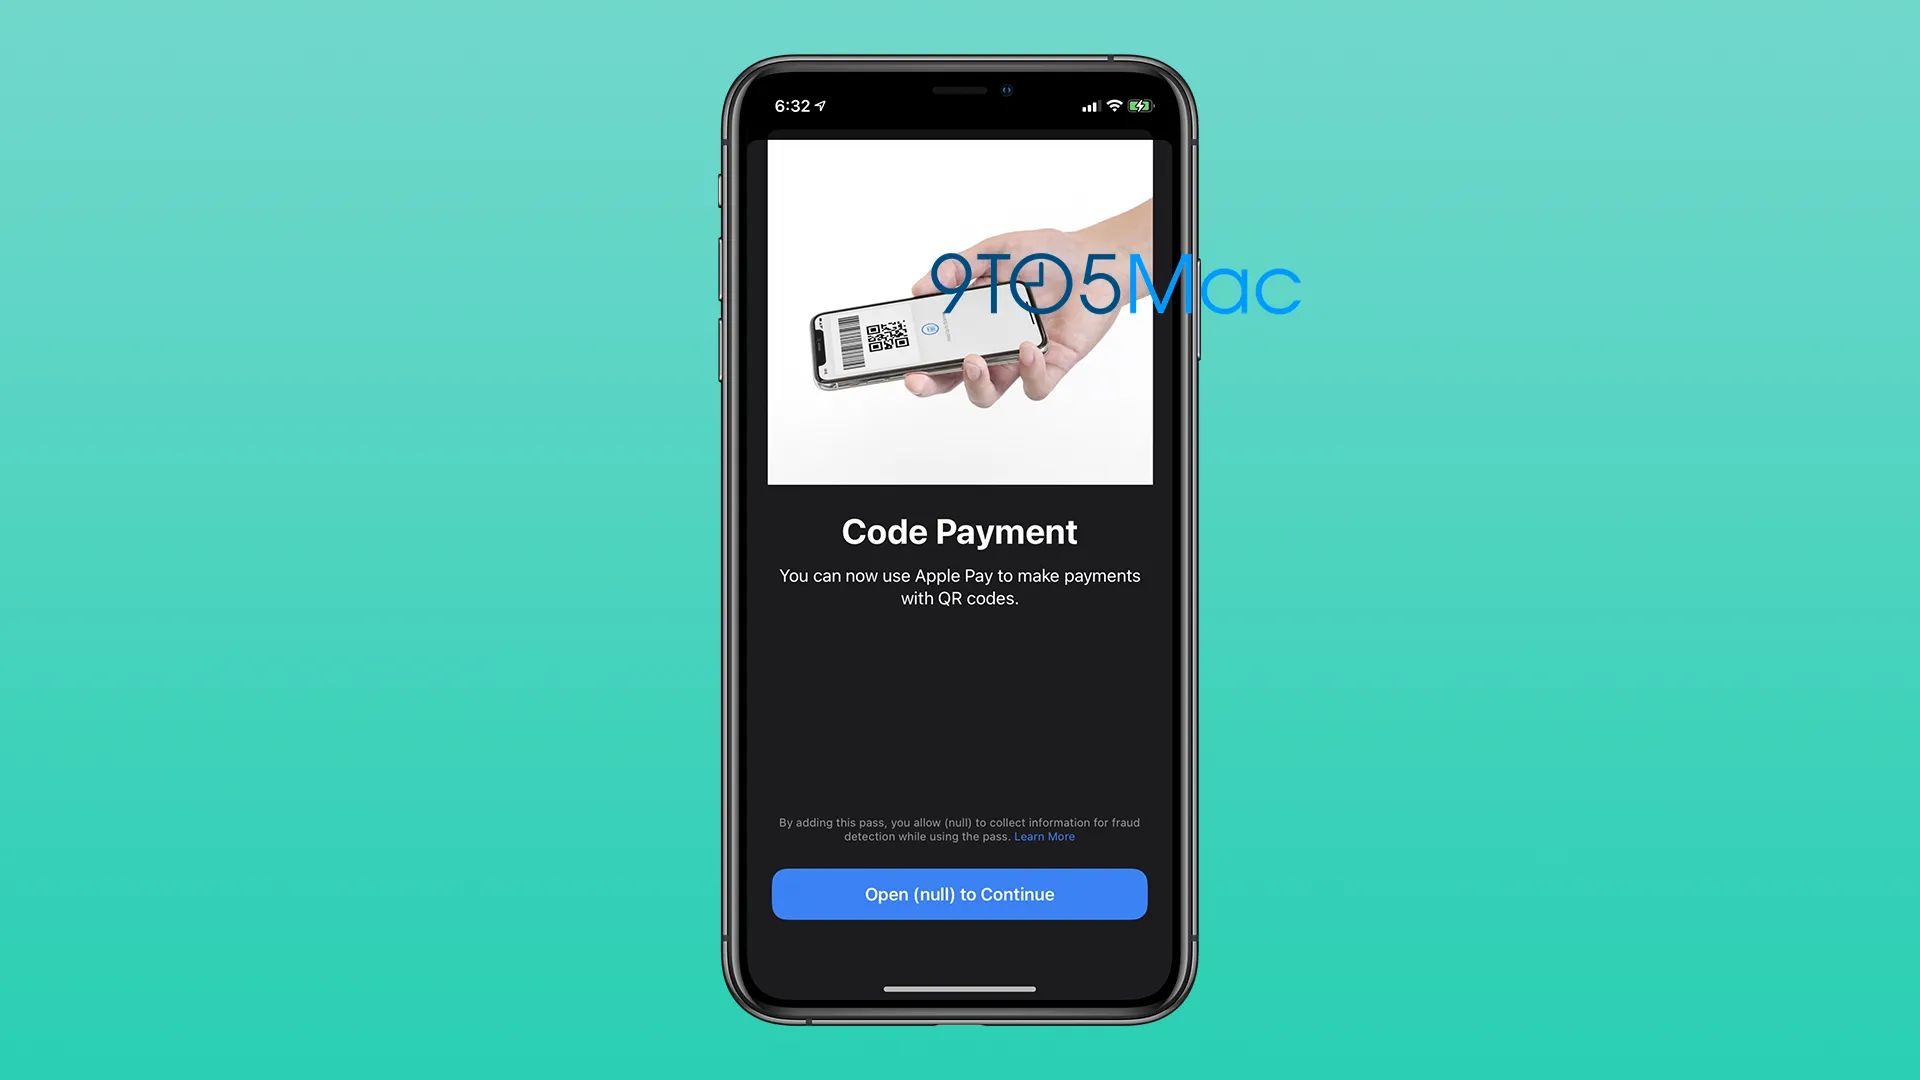 Apple Pay Could Be Used to Make Payments With QR Codes in the Future